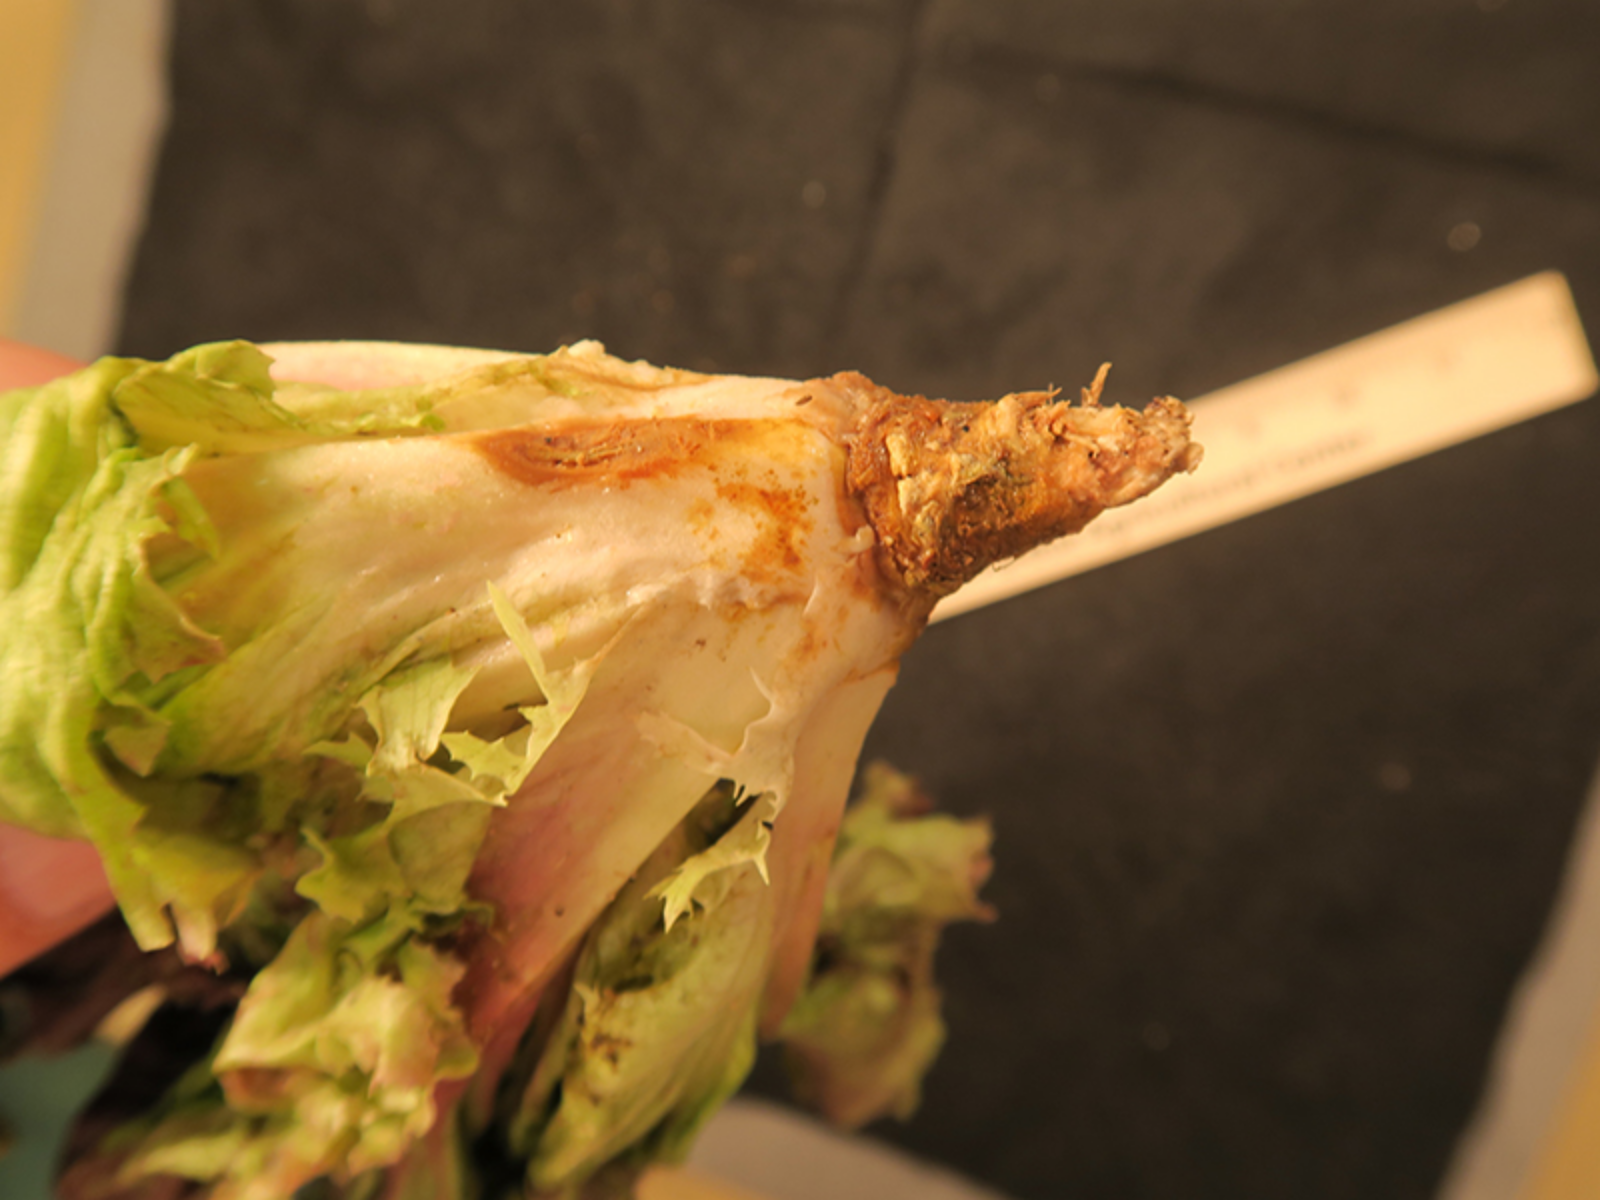 Symptoms of lettuce drop may include brown, rotten lesions on leaf mid-ribs. 